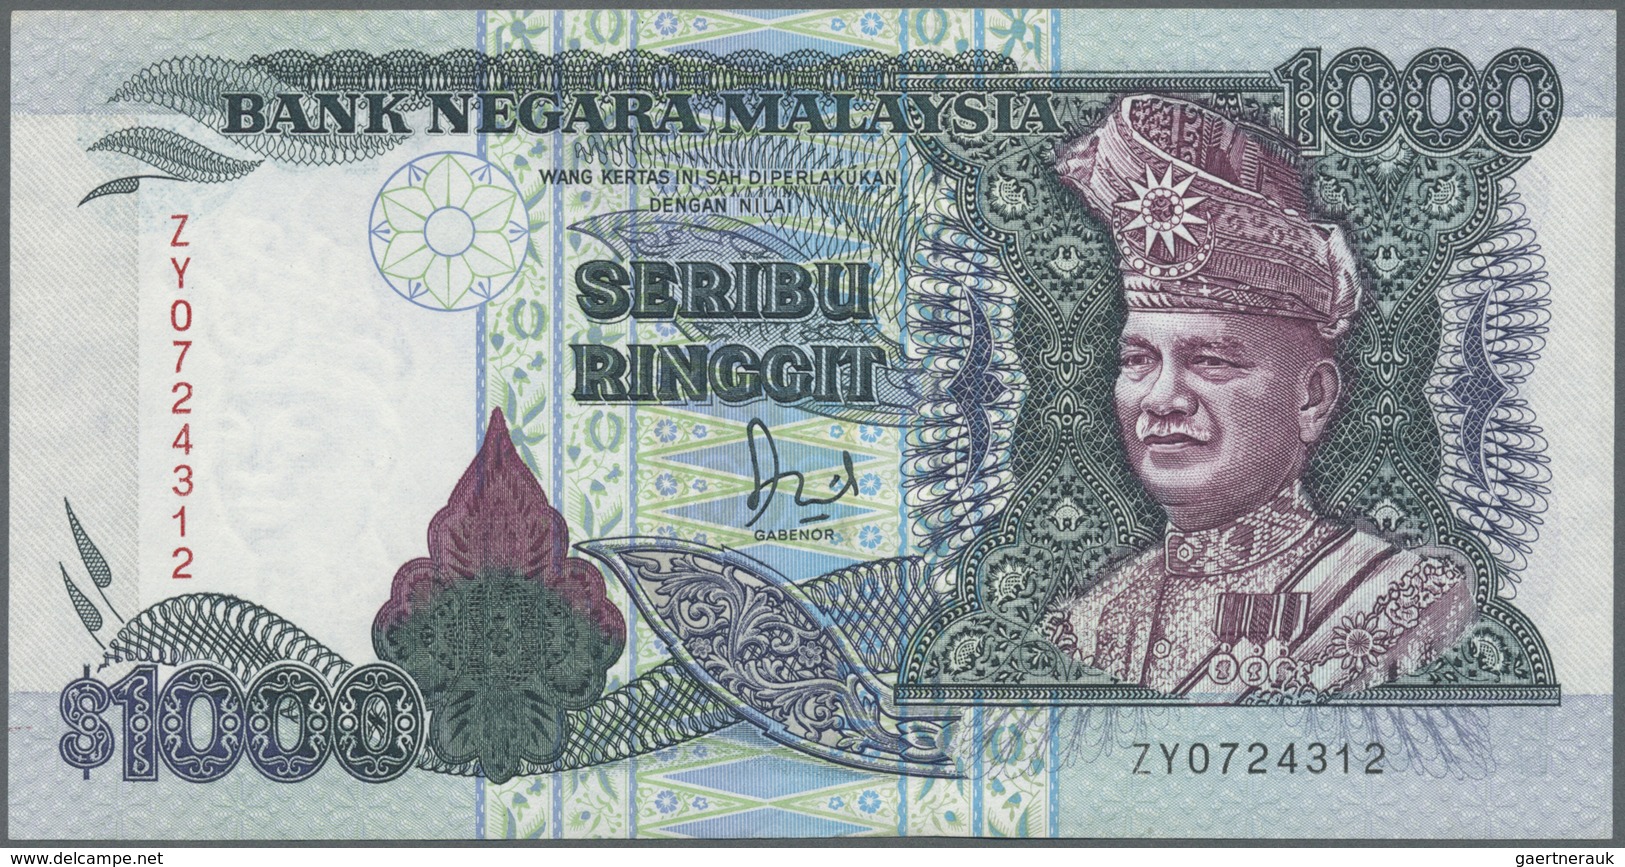 Malaysia: 1000 Ringgit ND P. 34, In Condition: AUNC. - Malesia